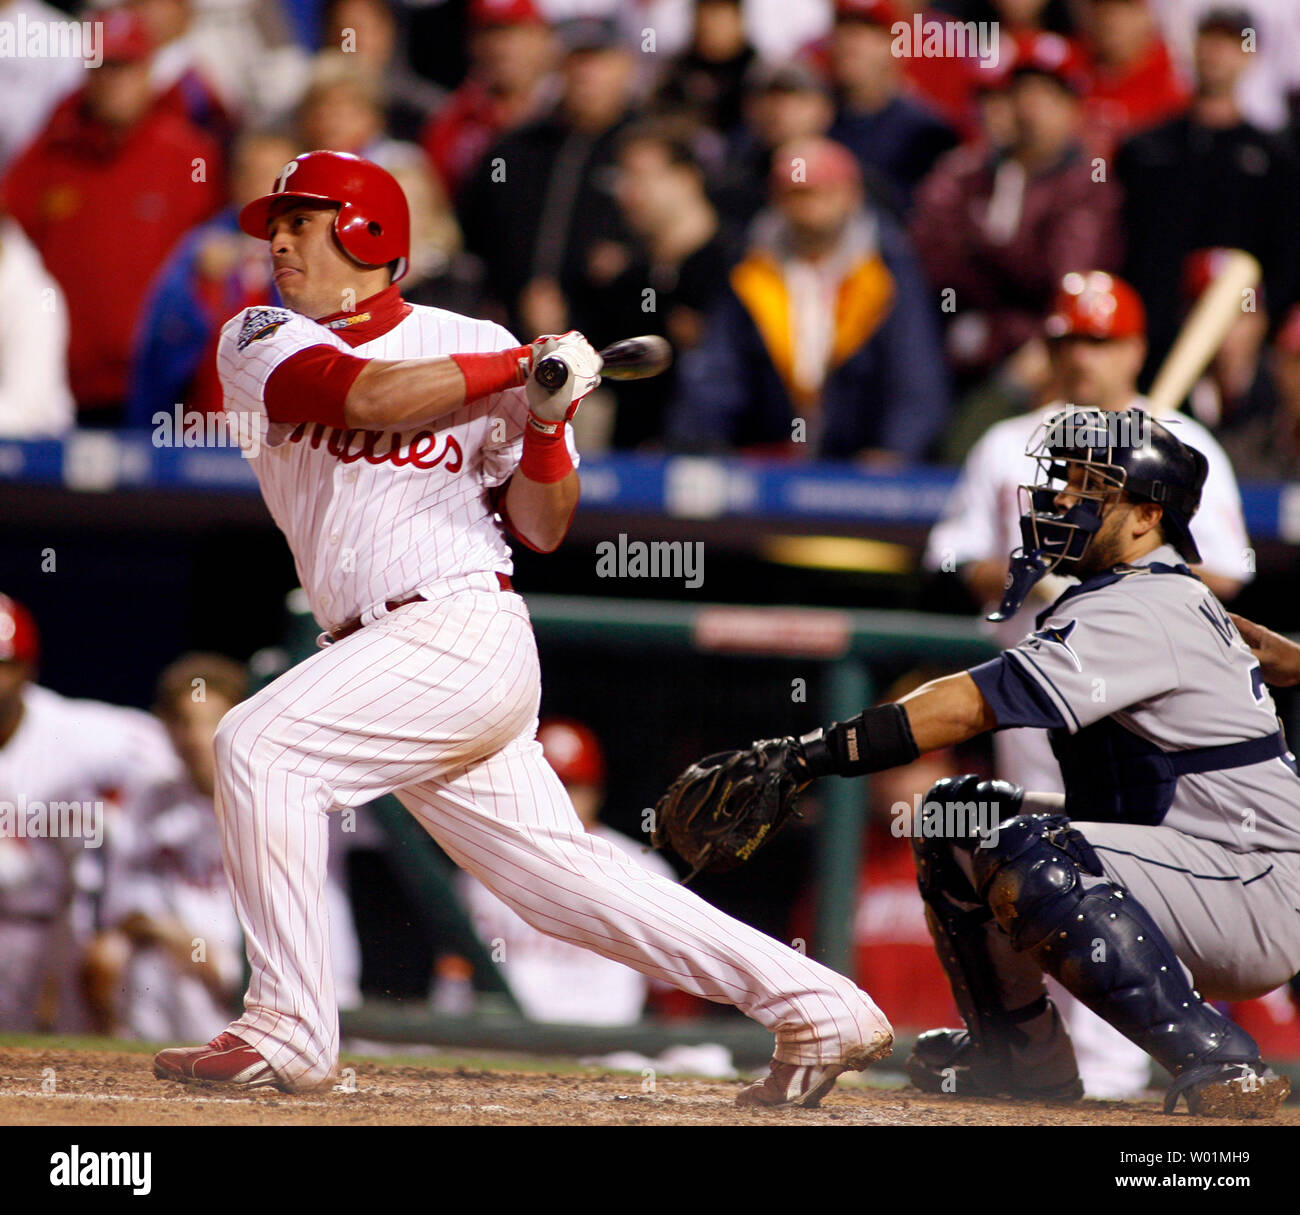 Philadelphia Phillies catcher Carlos Ruiz hits a infield single during  ninth inning World Series game 3 play with the Tampa Bay Rays in  Philadelphia at Citizens Bank Park October 25, 2008. His